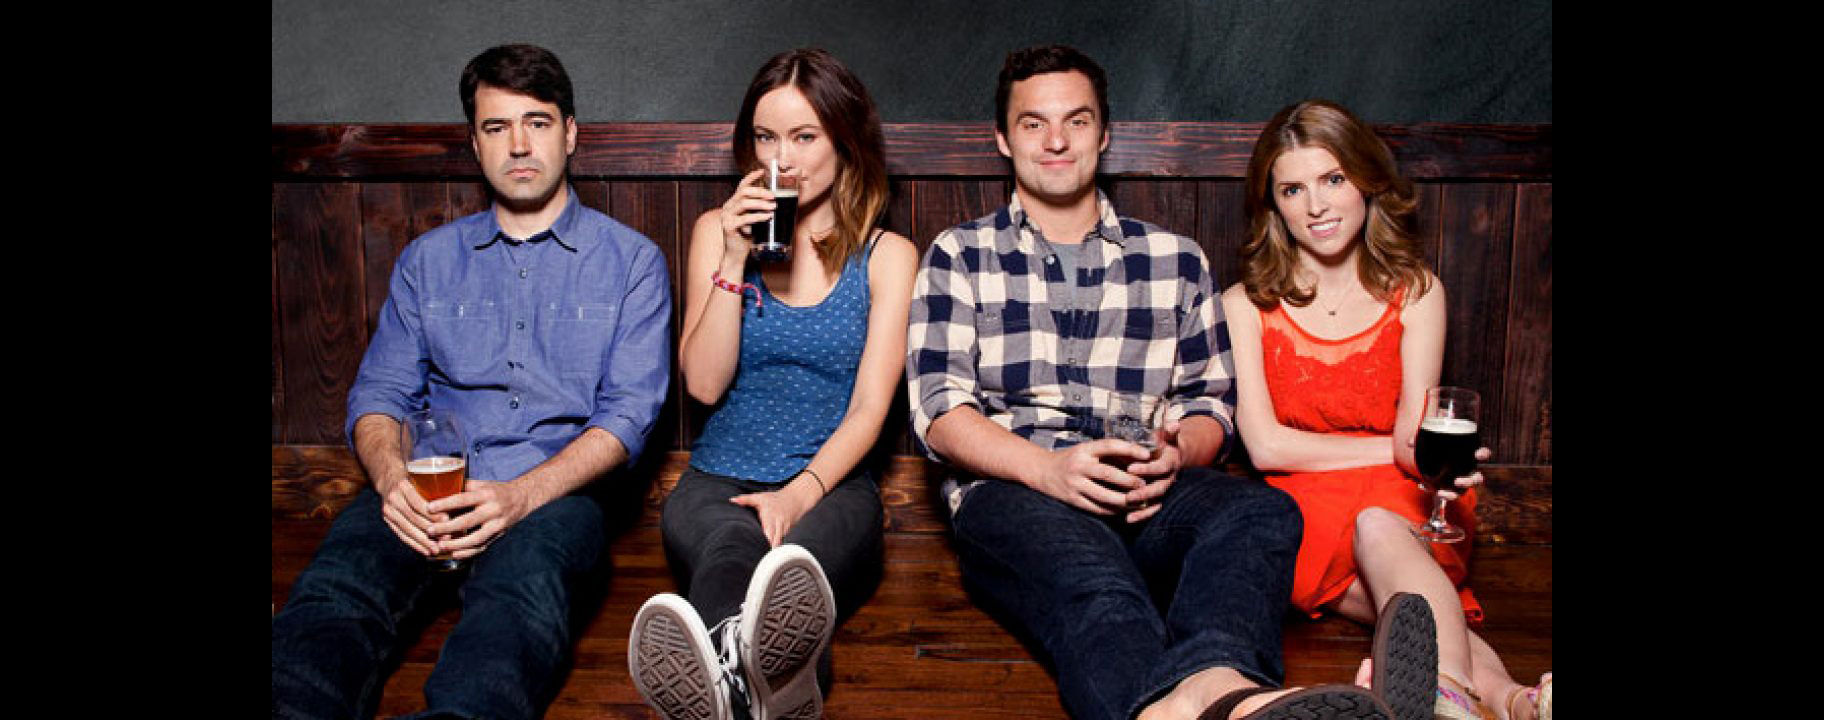 "Drinking Buddies" (Magnolia Pictures)